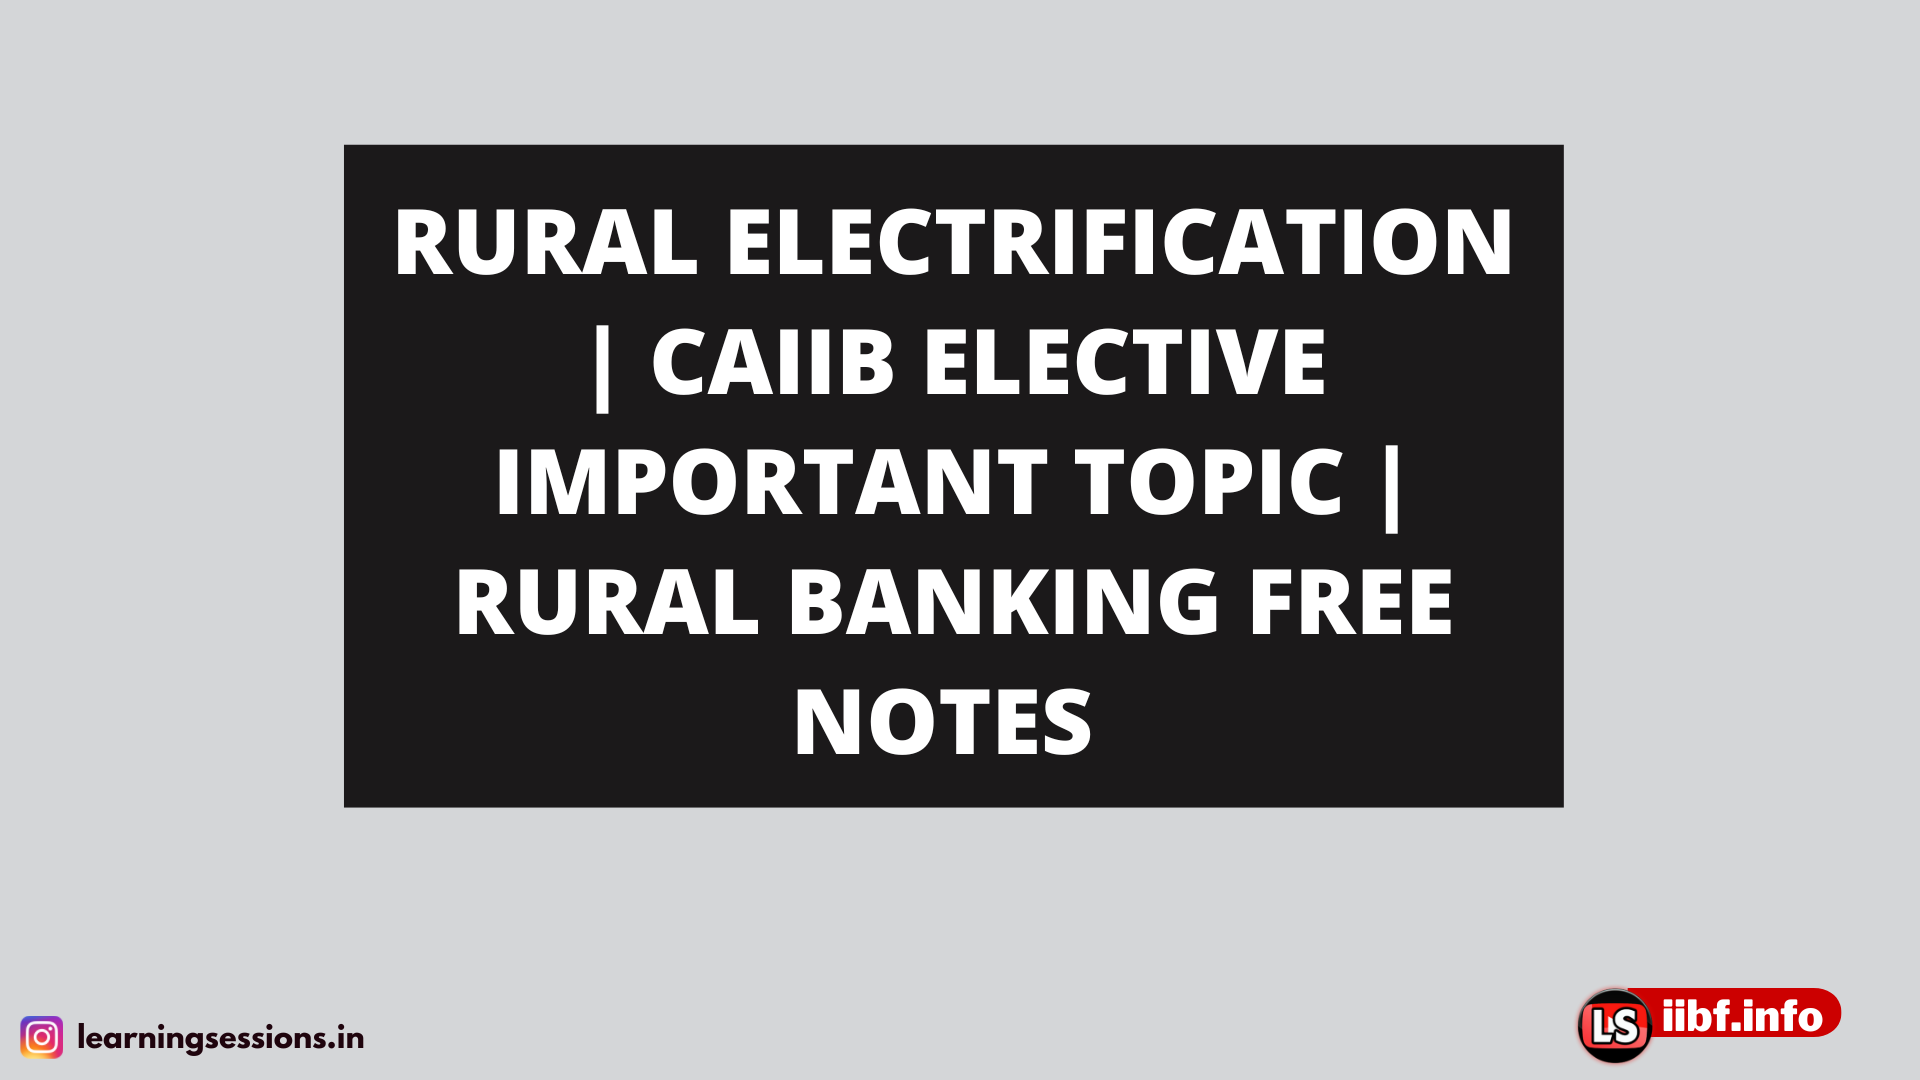 RURAL ELECTRIFICATION | CAIIB ELECTIVE IMPORTANT TOPIC | RURAL BANKING FREE NOTES